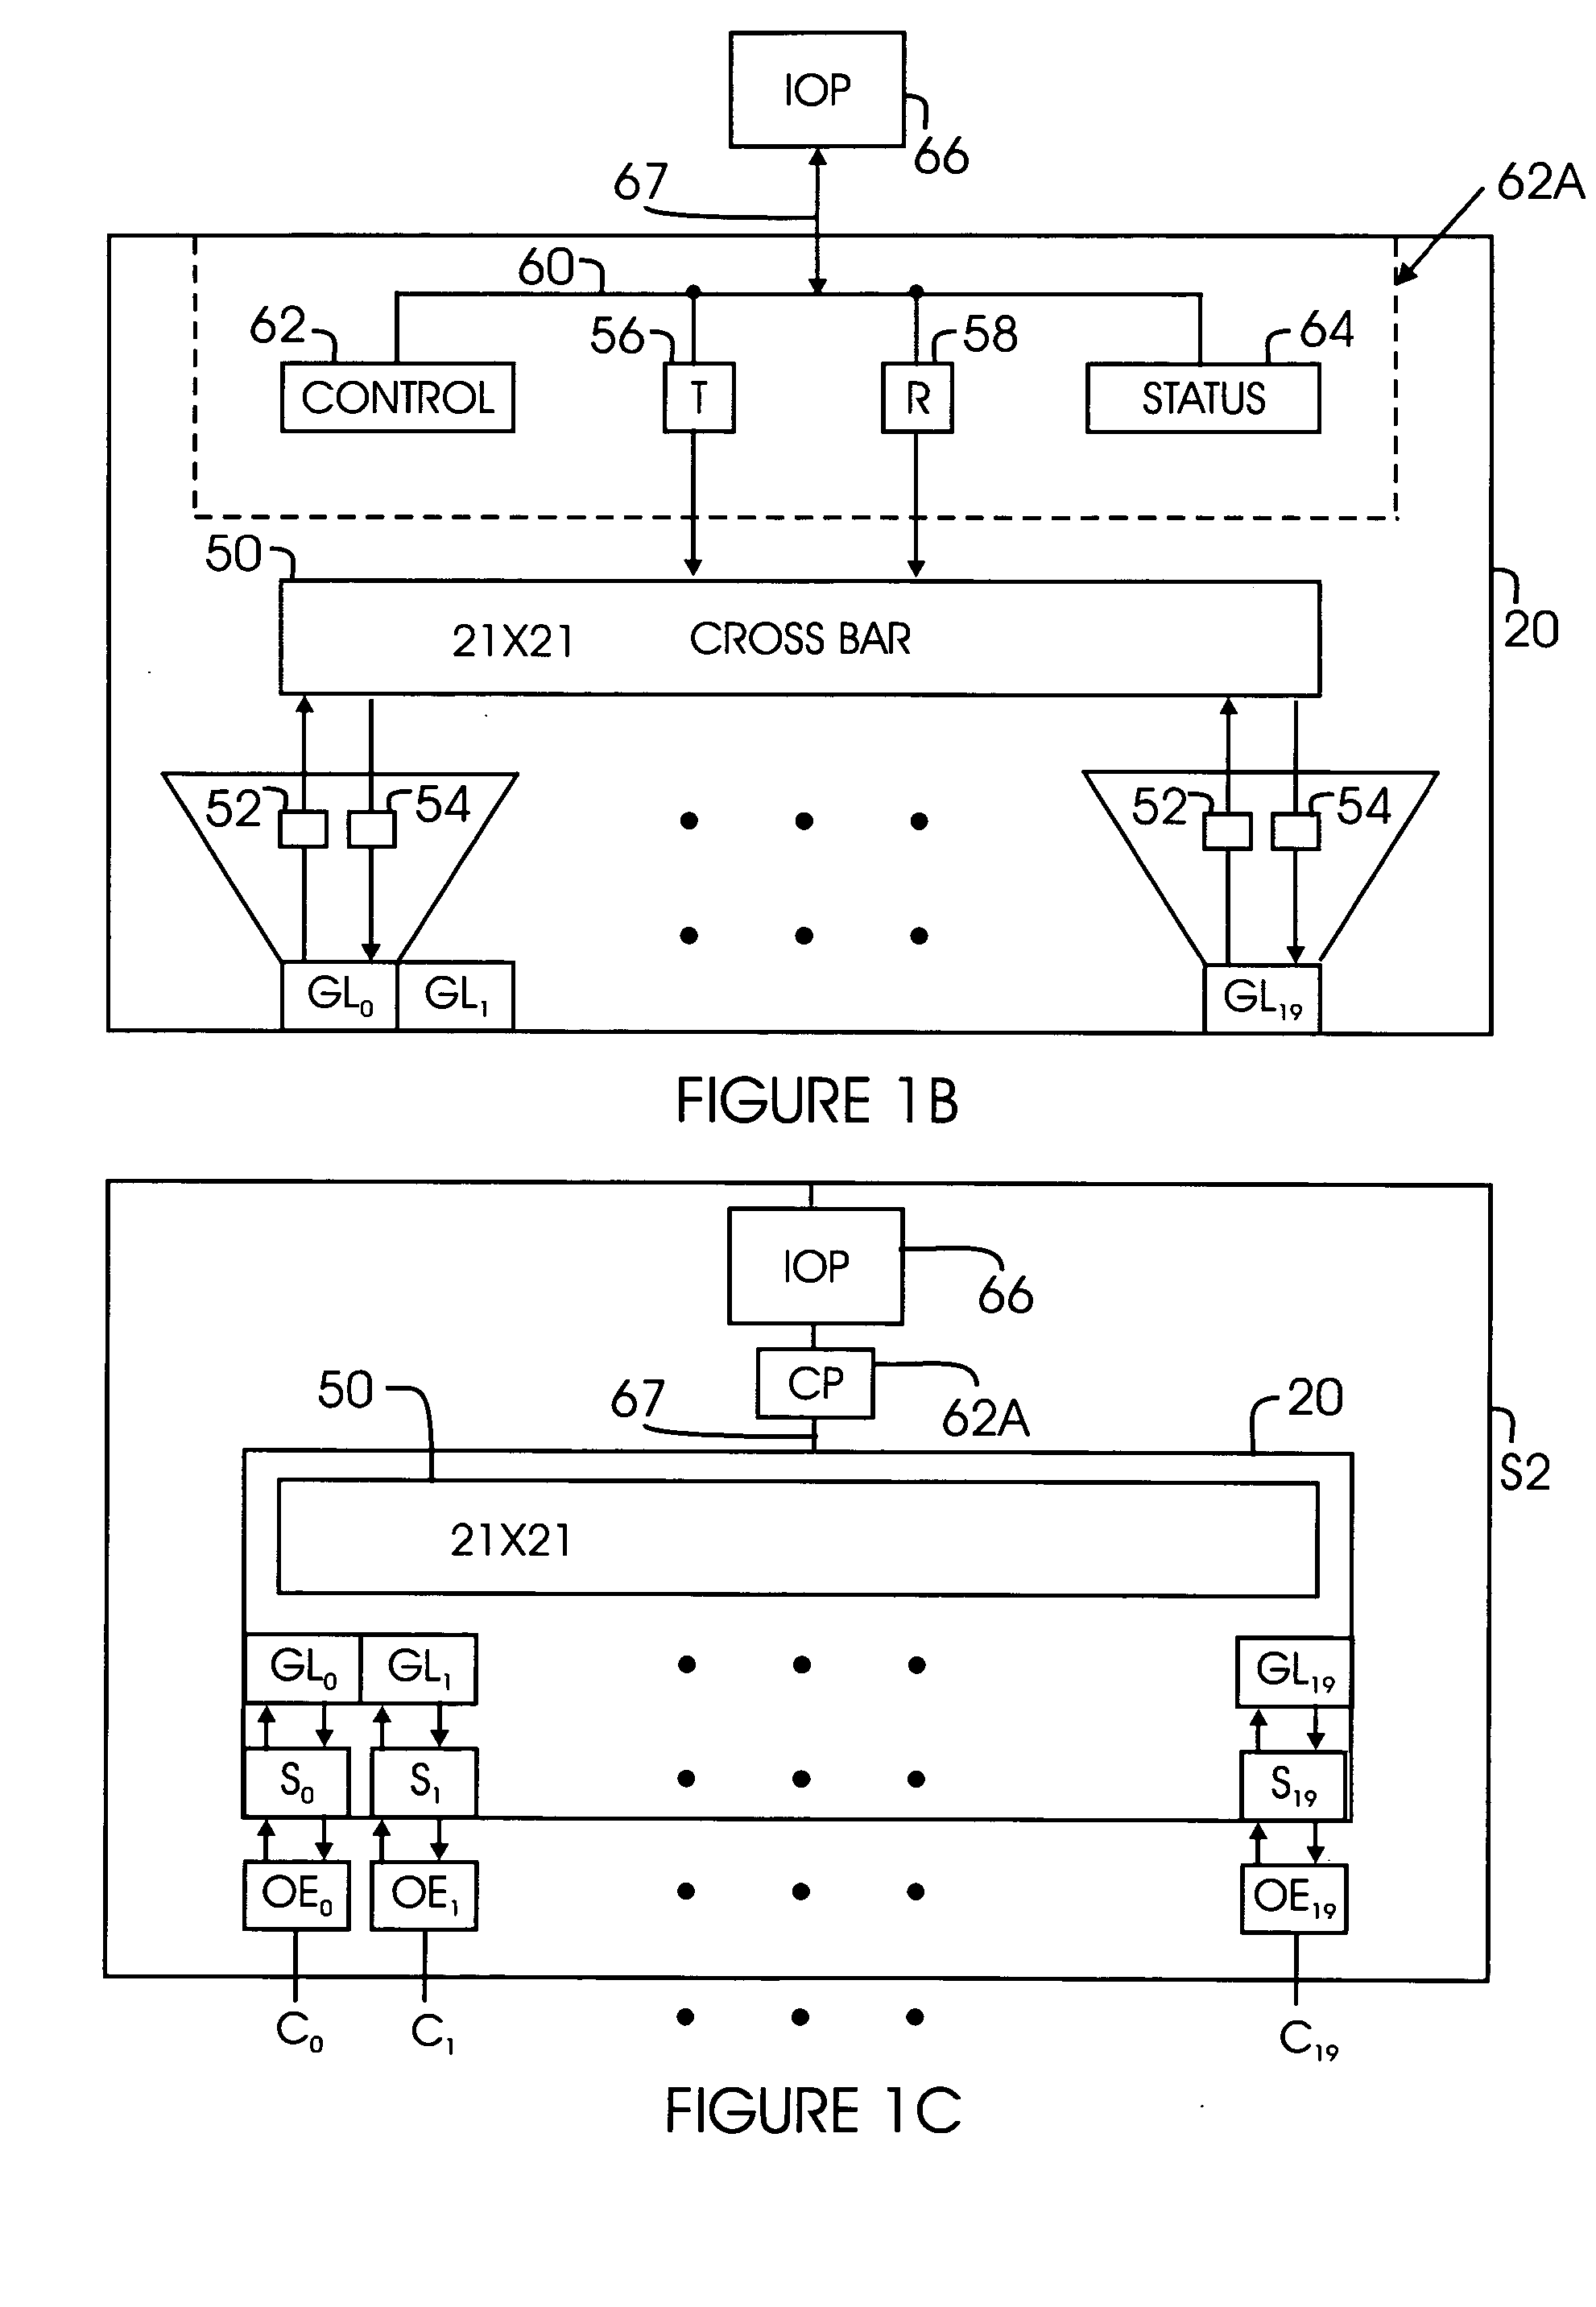 Method and system for power control of fibre channel switches